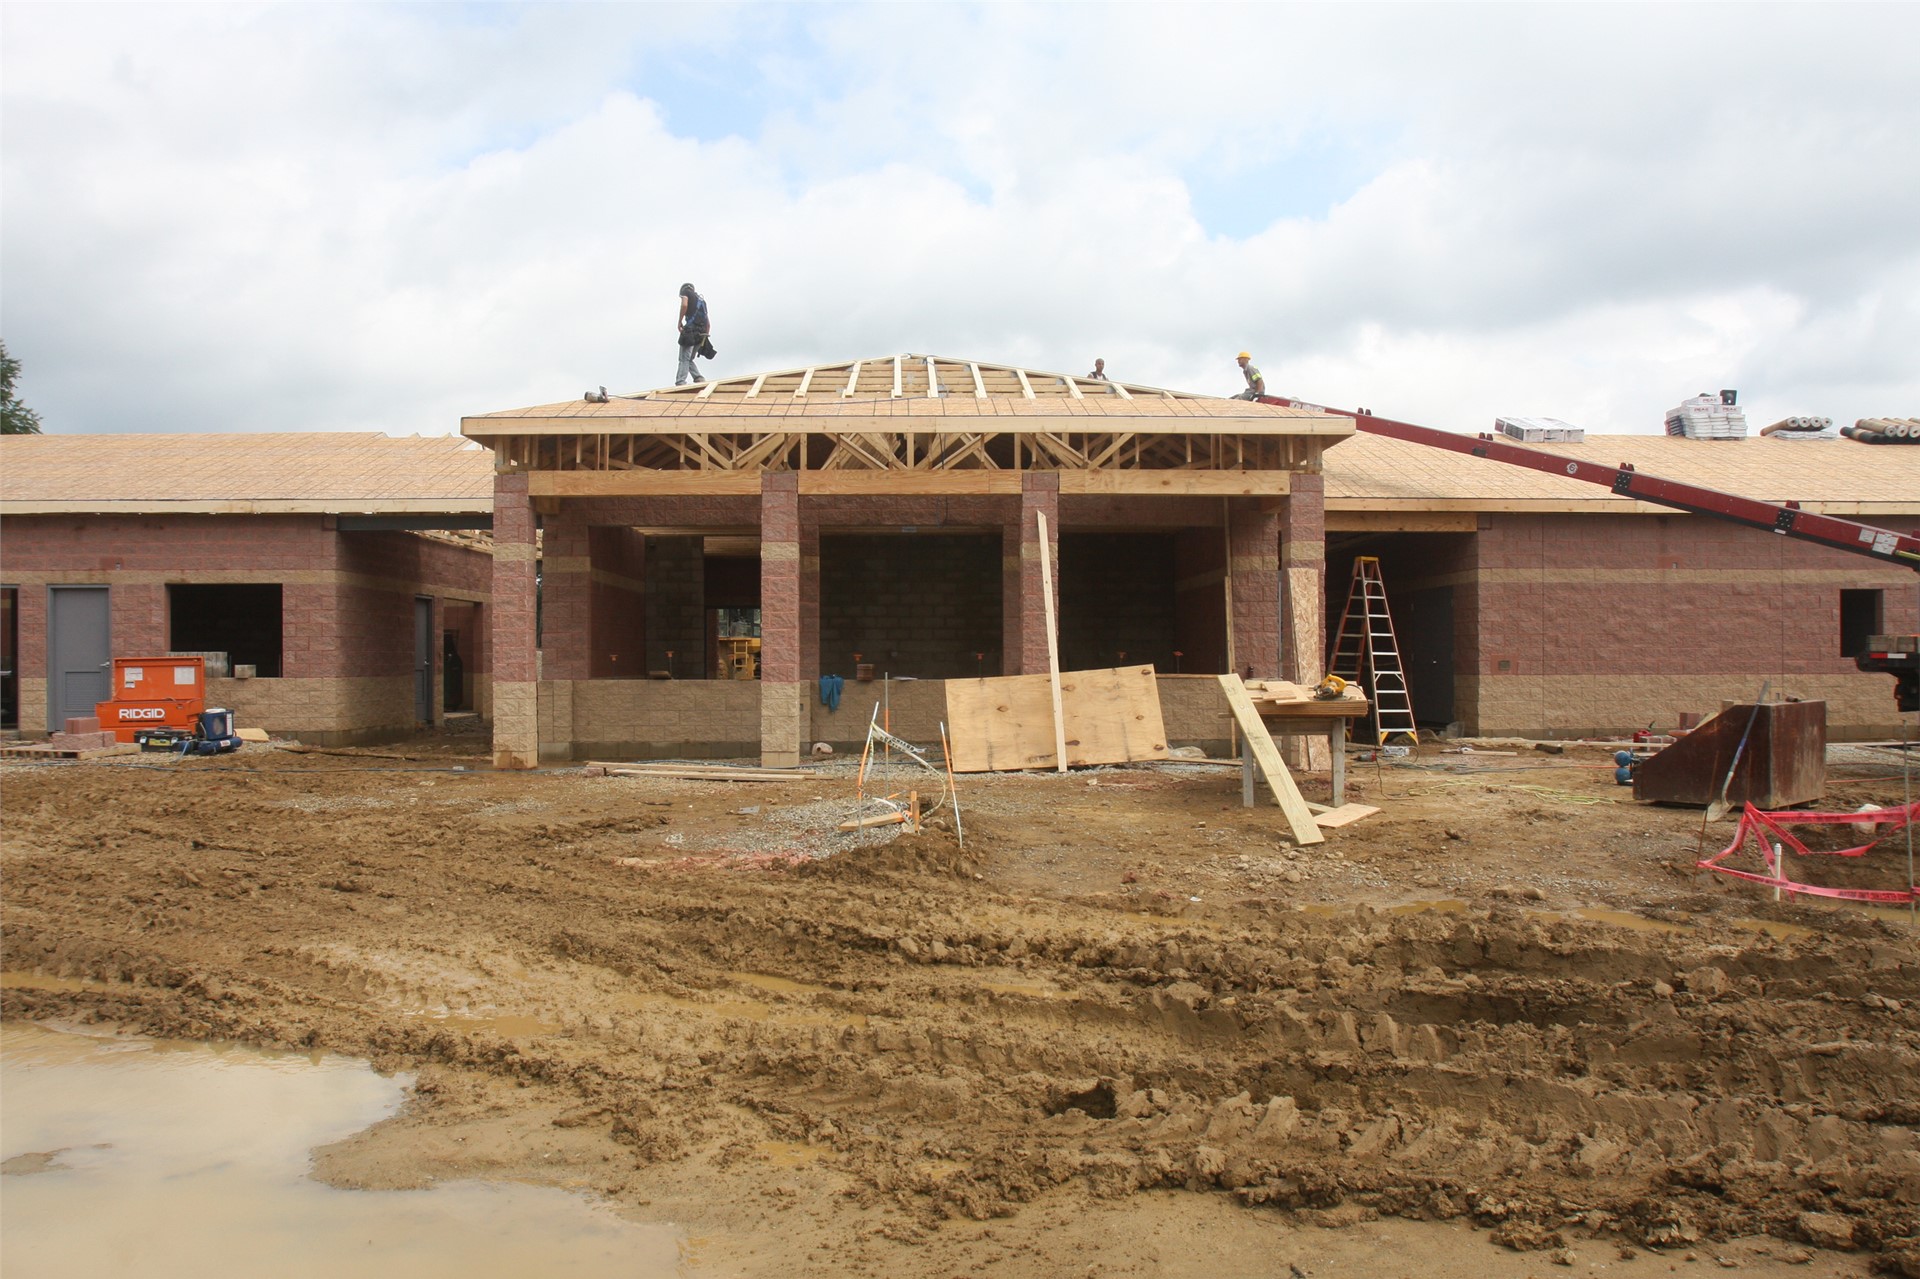 Concession stand portion of stadium building (from inside stadium)